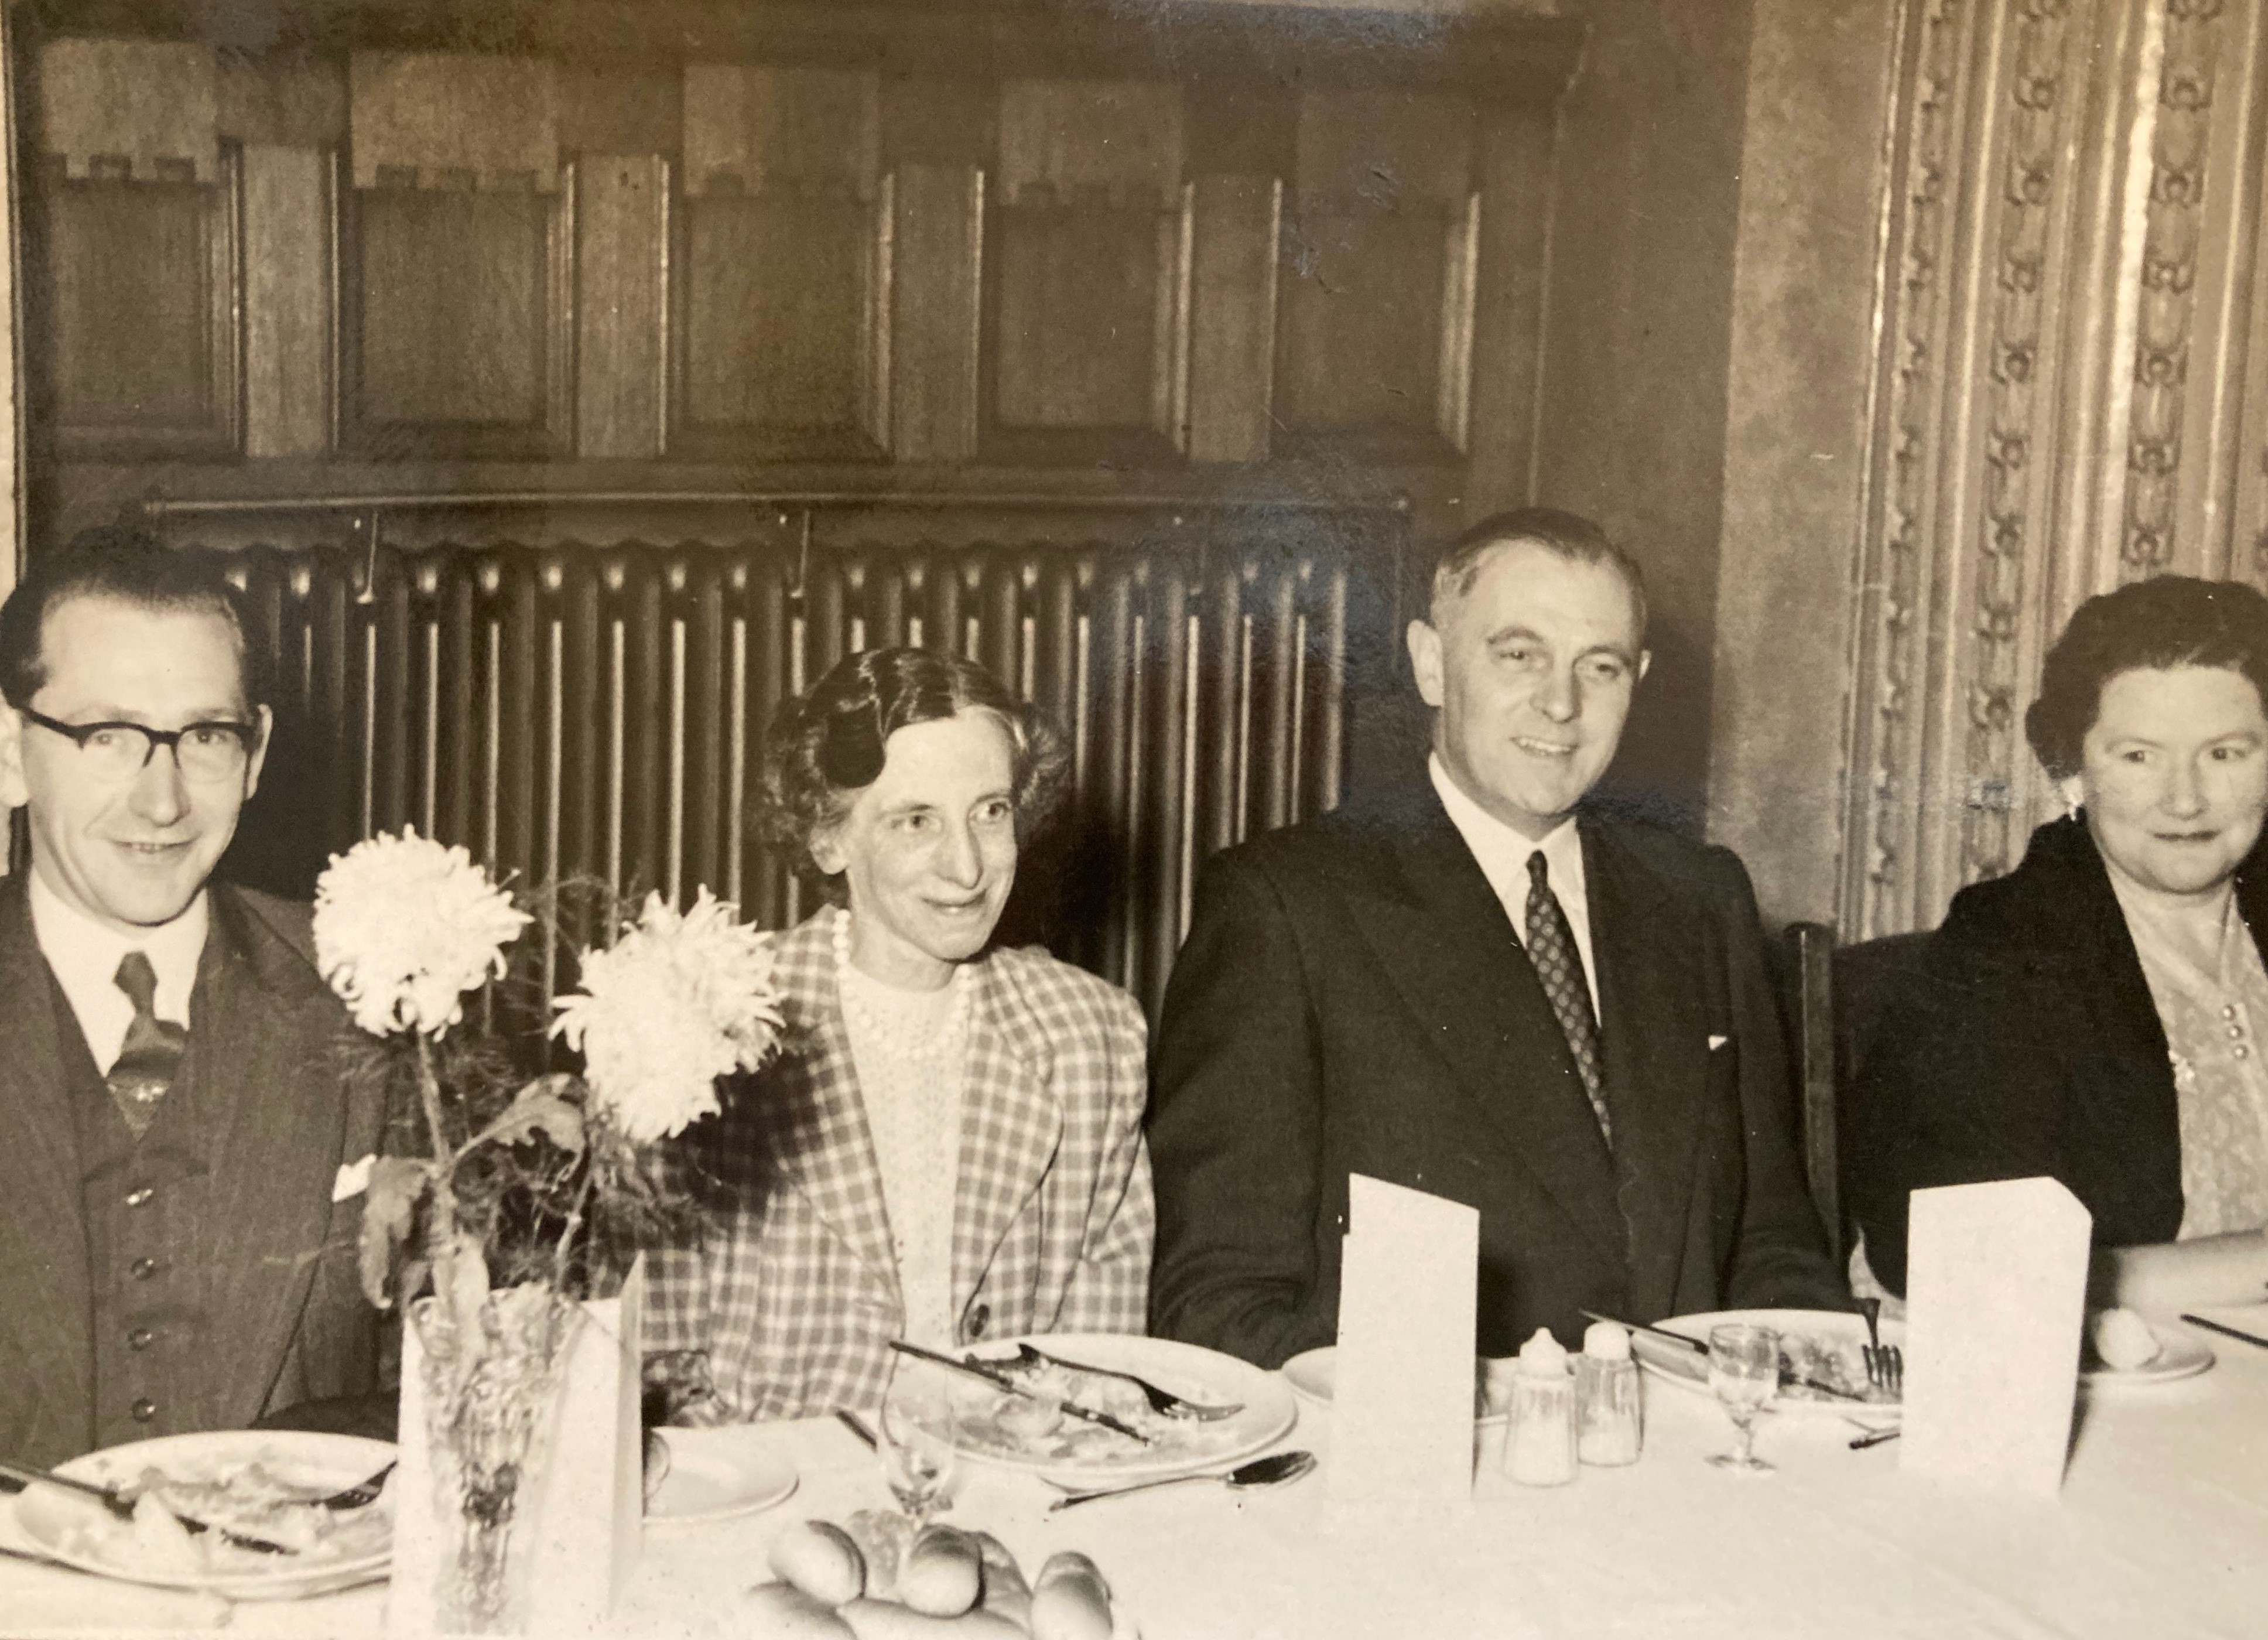 Eric and Mary Slater on the right at a dinner in 1955